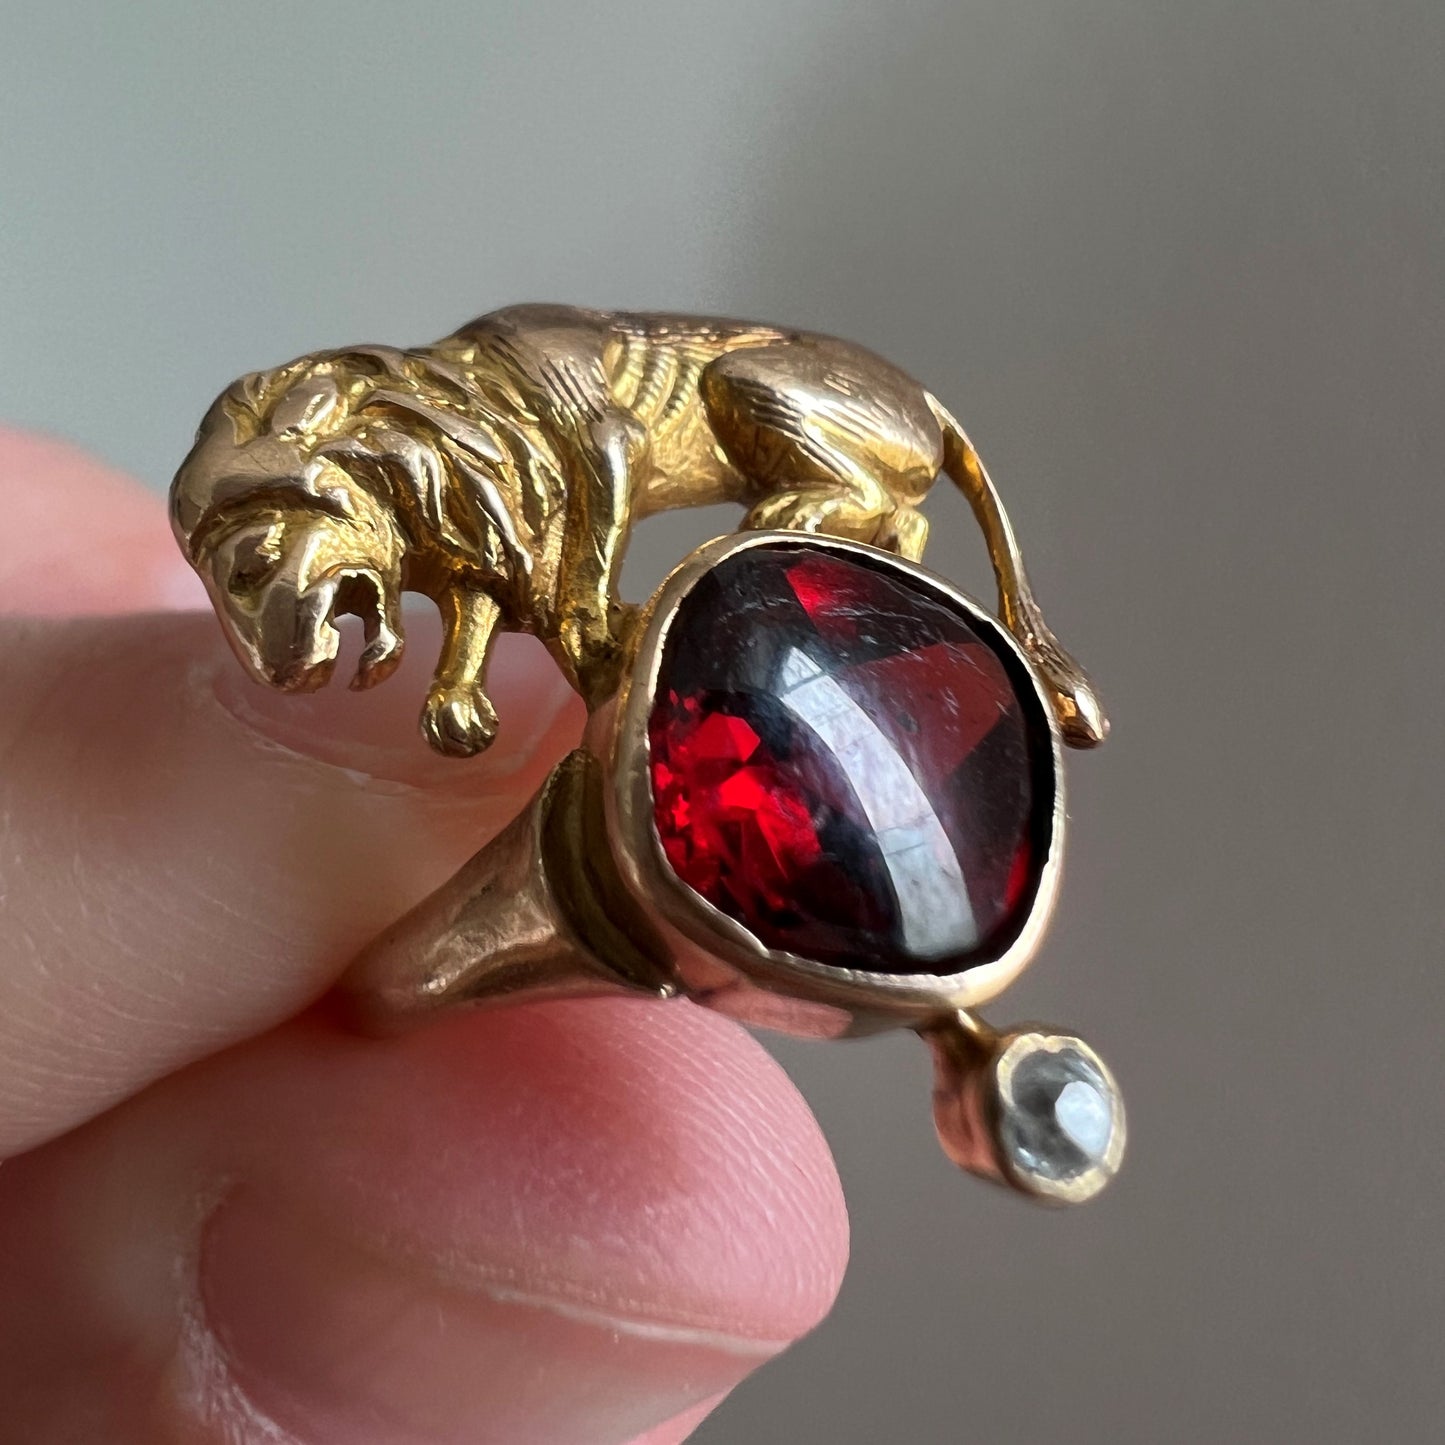 reimagined A N T I Q U E // garnet boulder / antique conversion ring in 14k yellow and rose gold with garnet and diamond / size 2.75 to 3